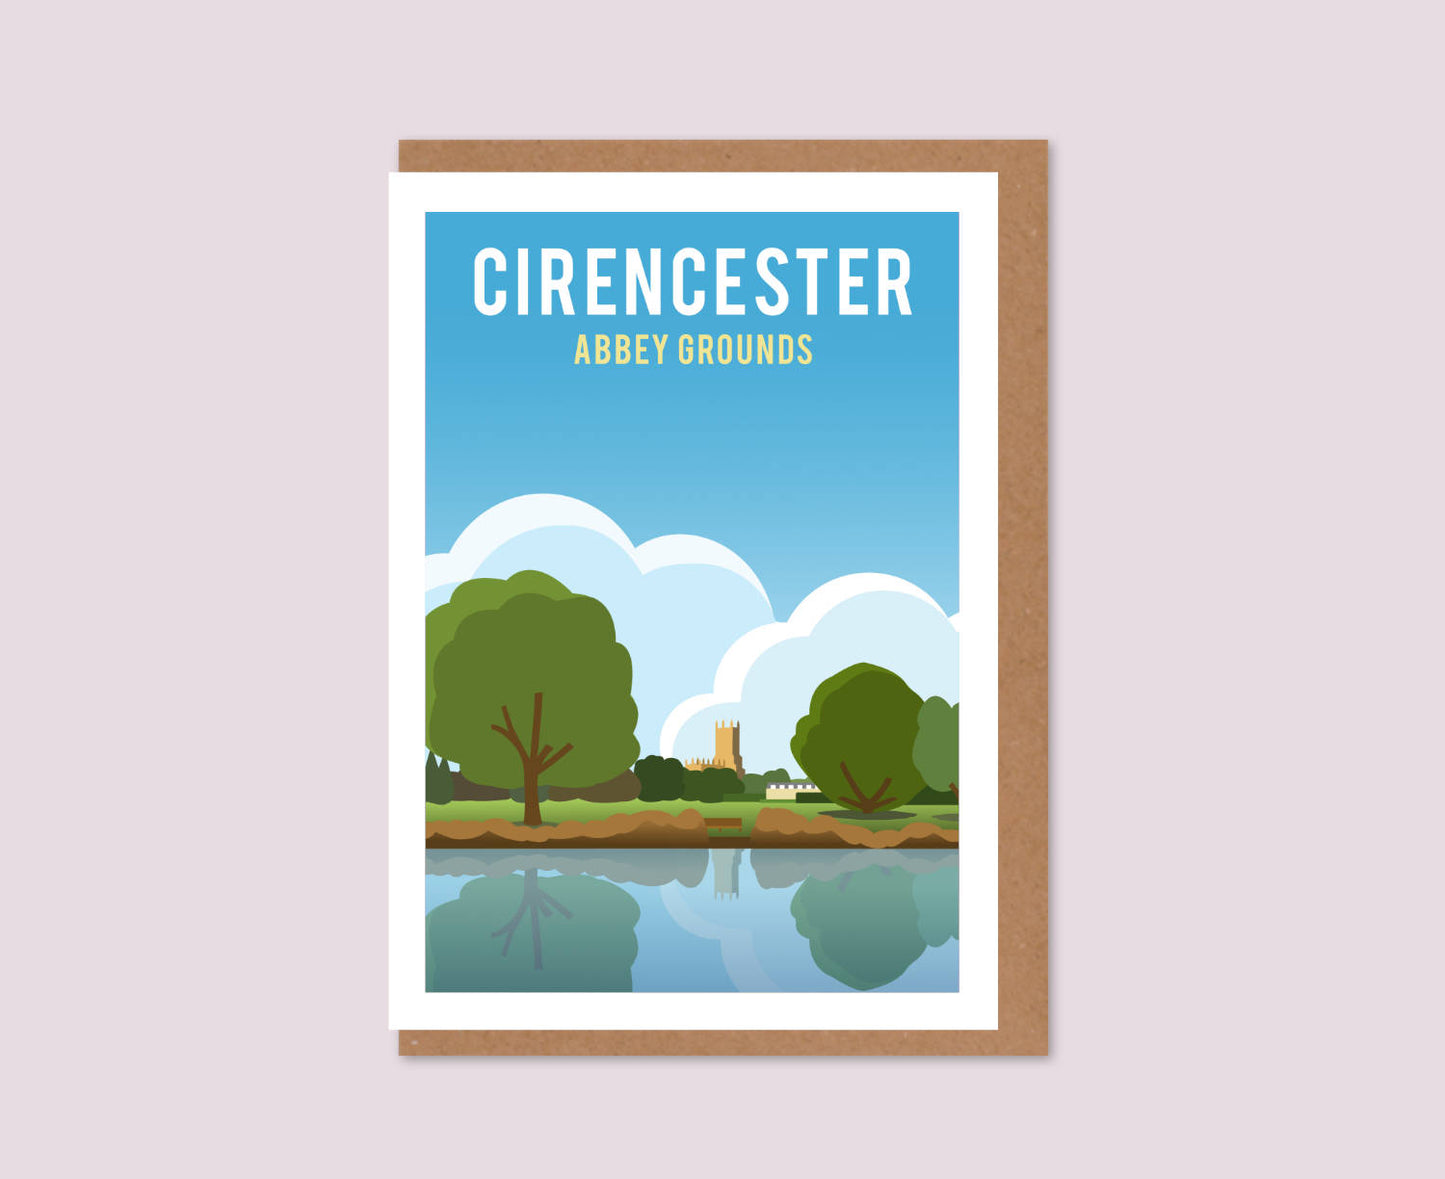 Cirencester Abbey Grounds Greeting Card Design